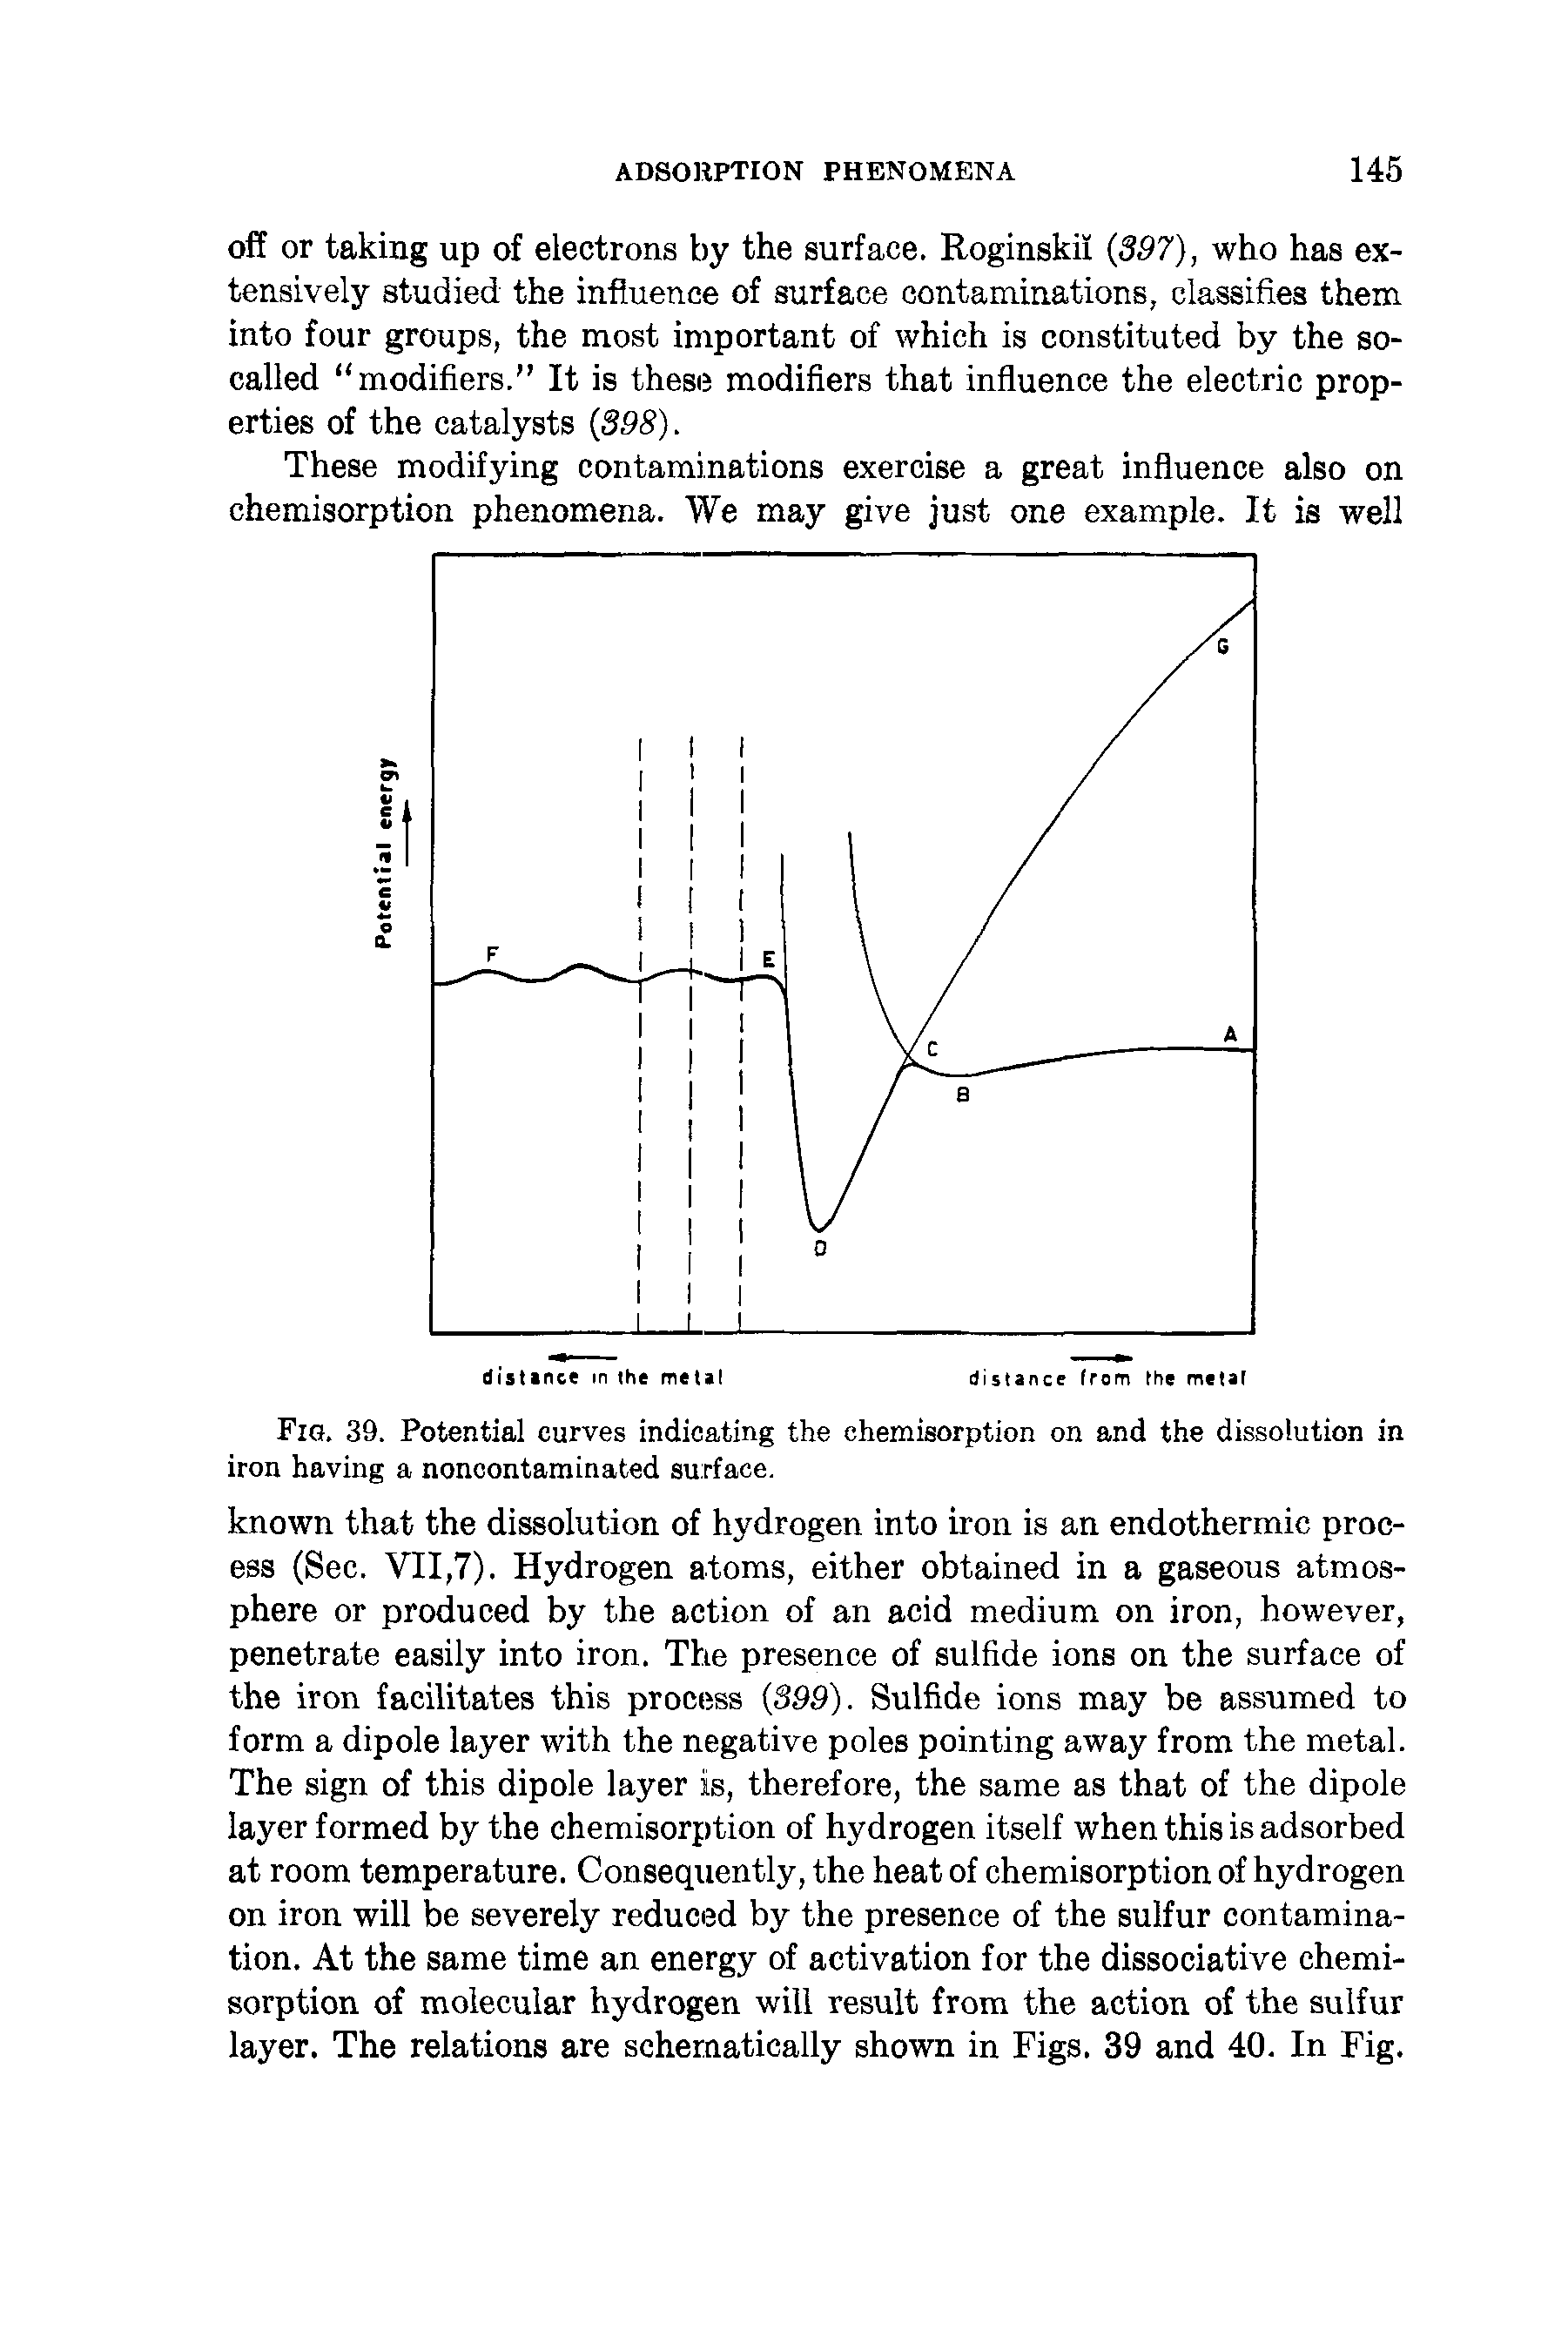 Fig. 39. Potential curves indicating the chemisorption on and the dissolution in iron having a noncontaminated surface.